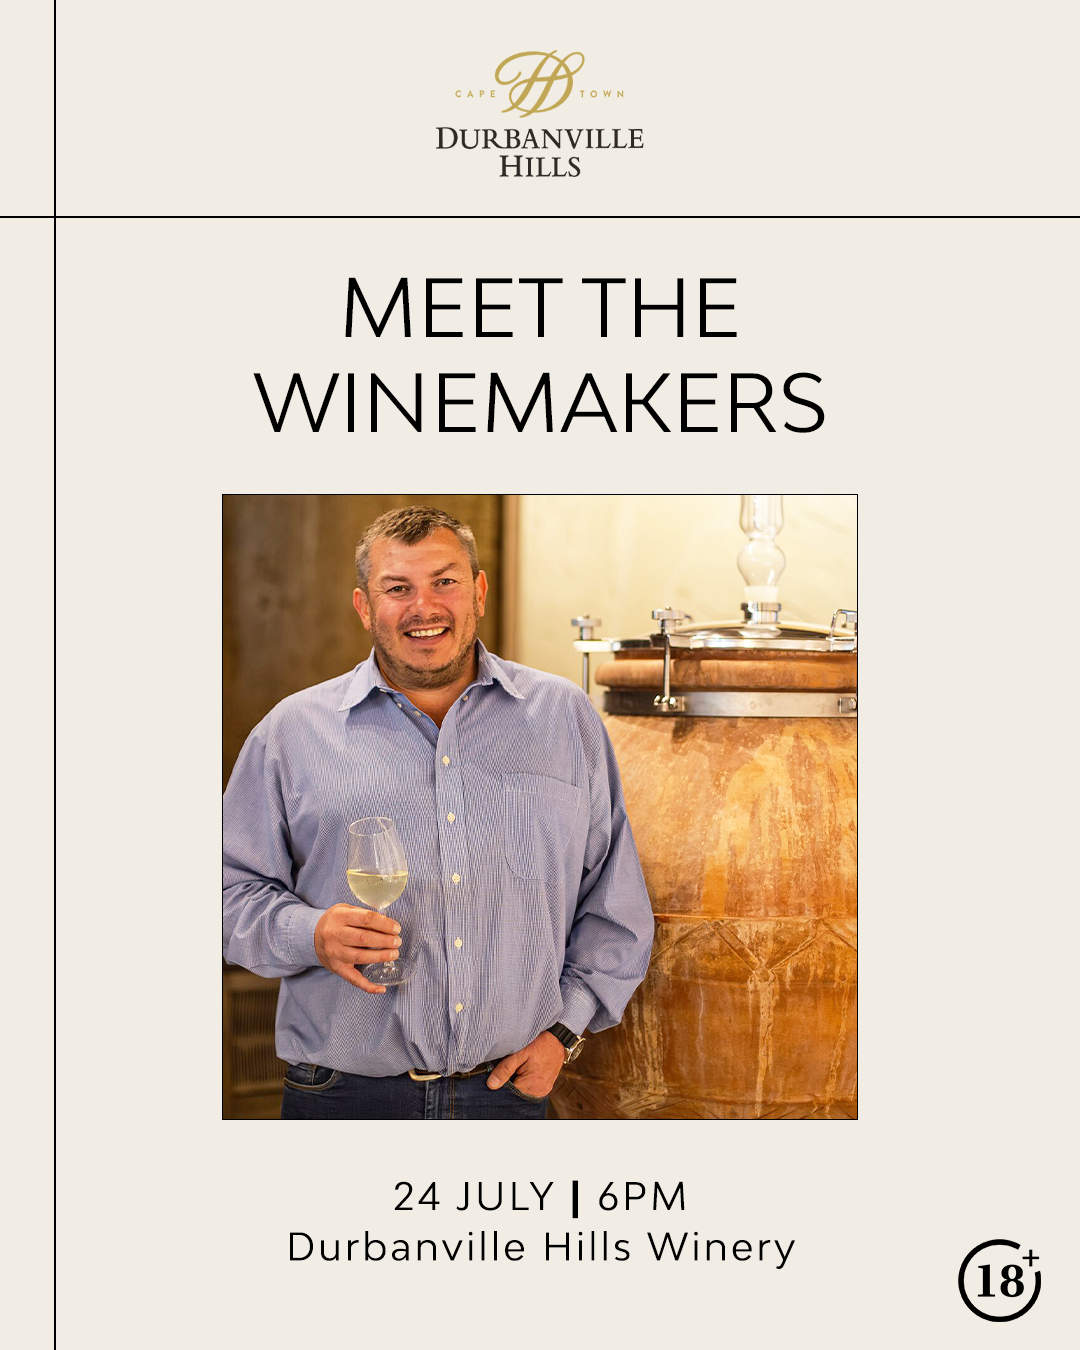 Meet the Winemakers - 24th July